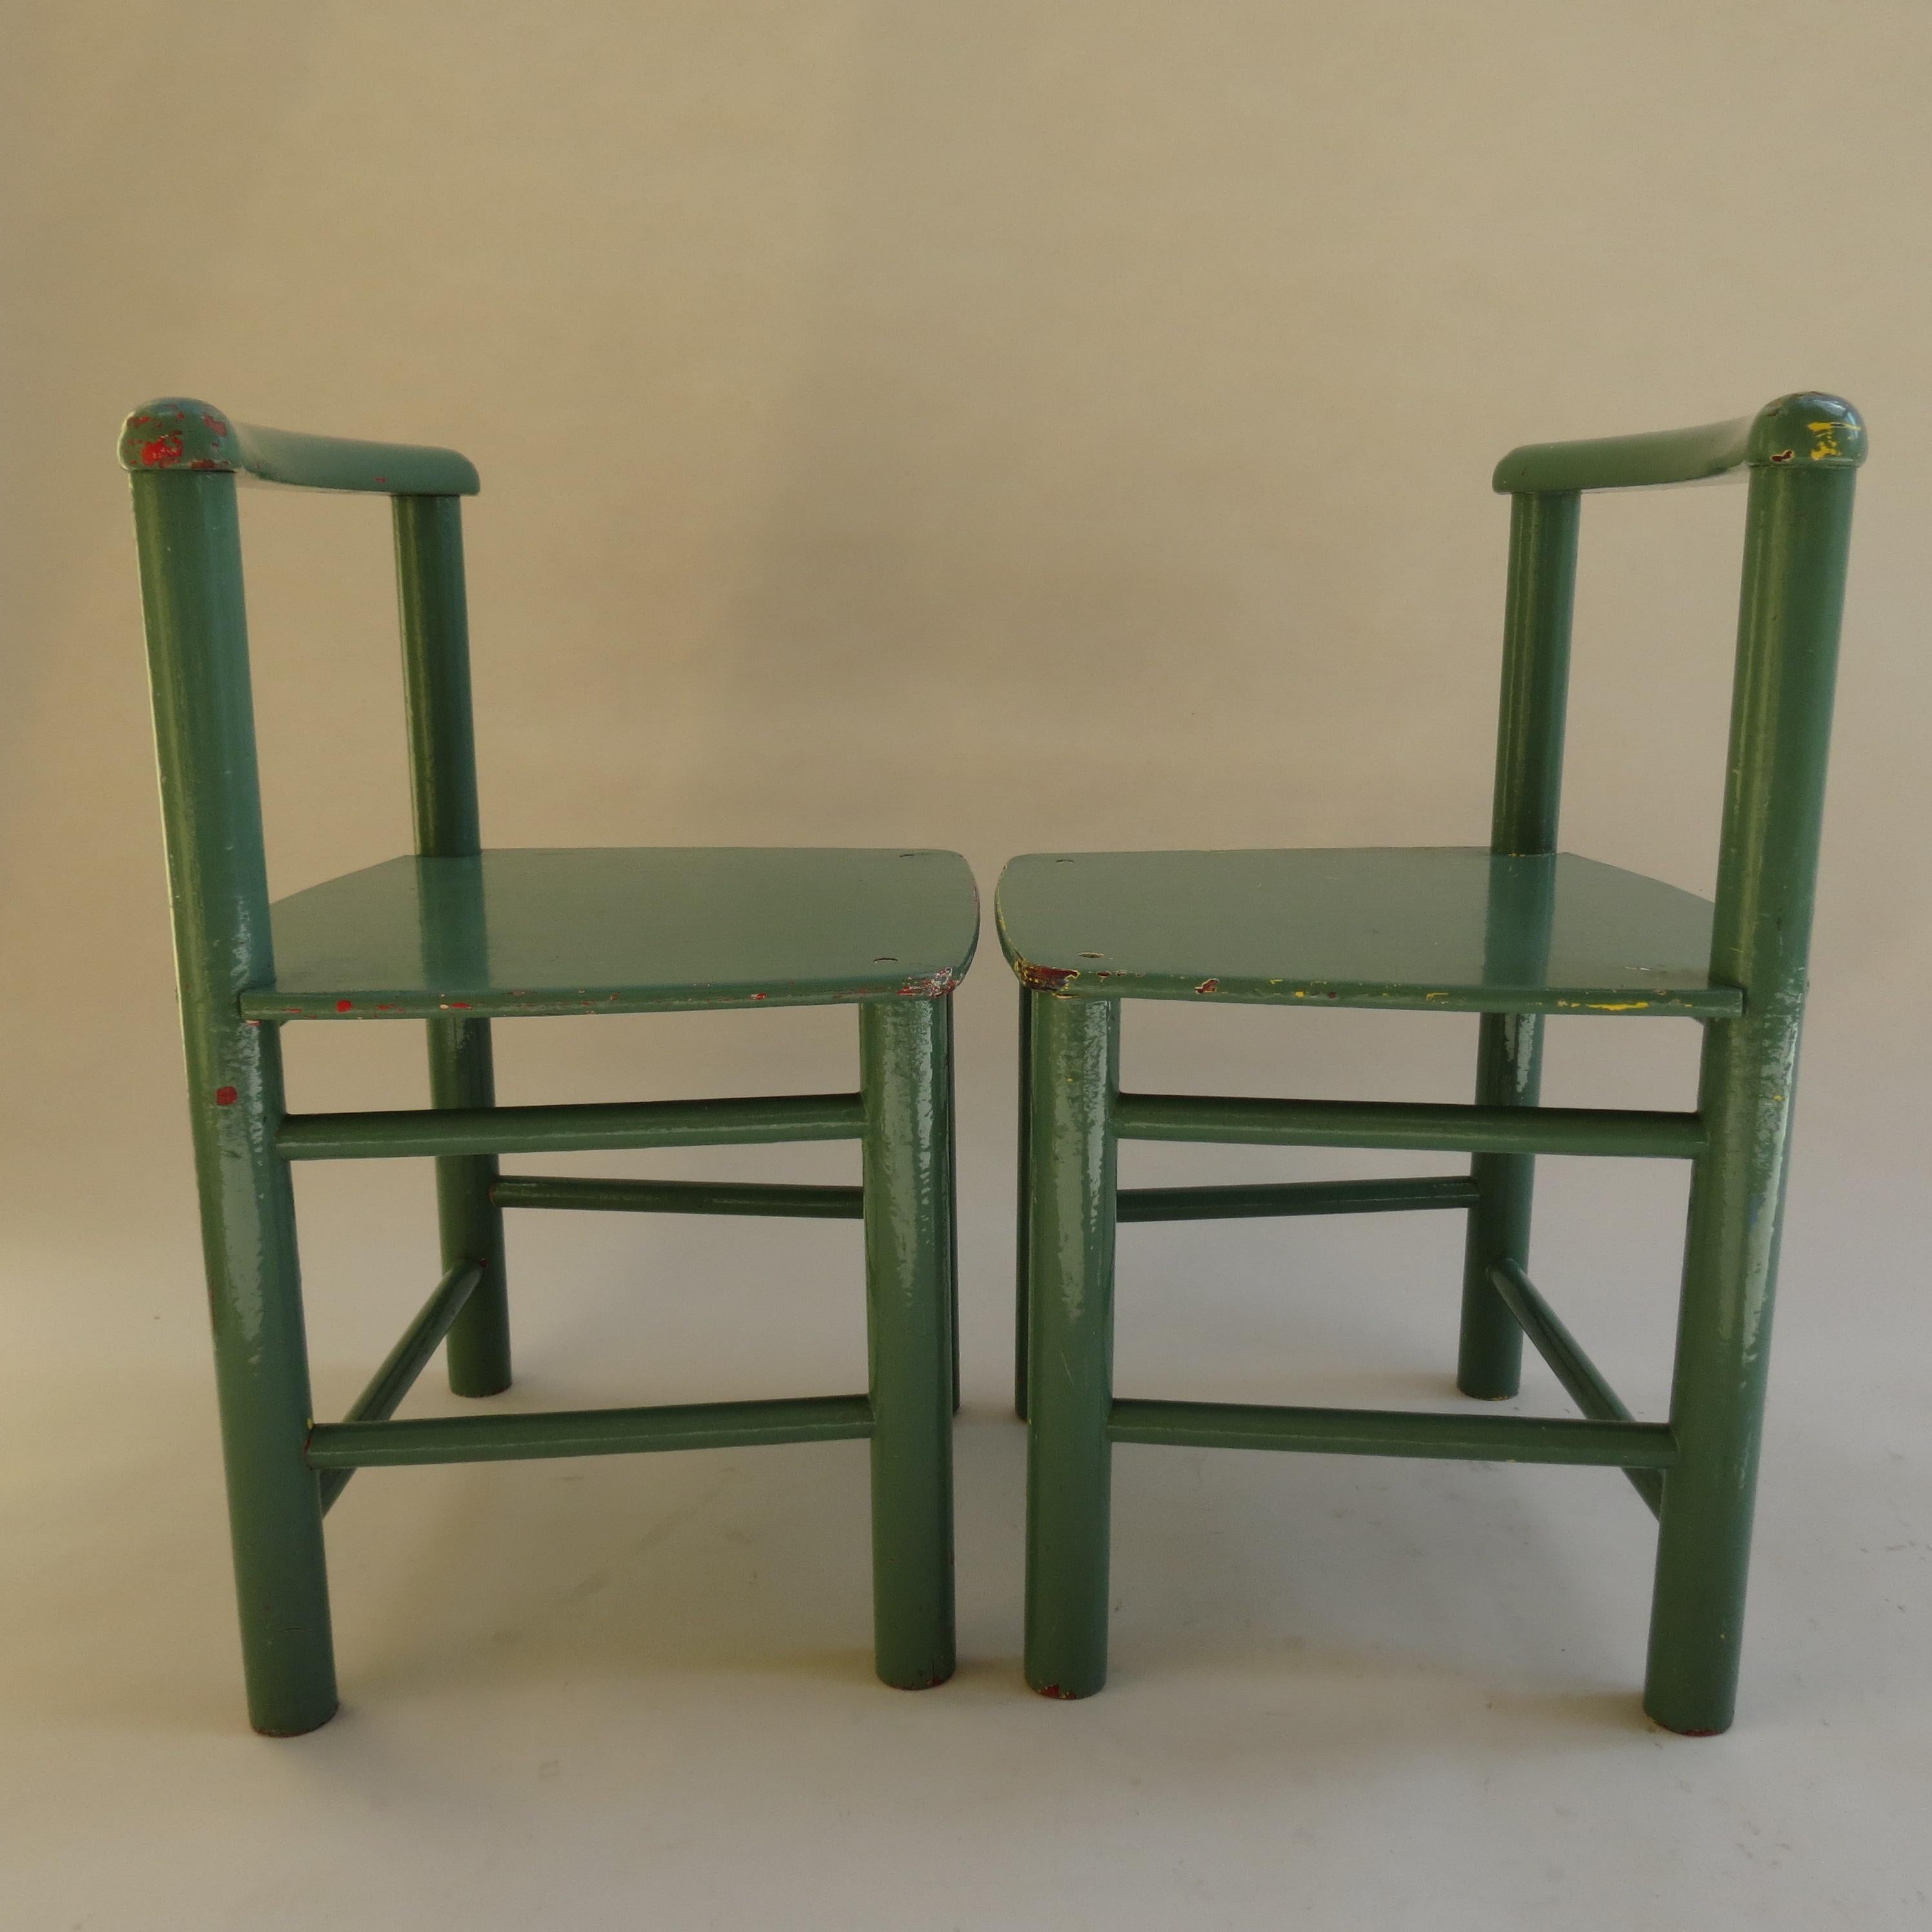 Pair of Scandinavian Childs Chairs in Green from the 1960s 4